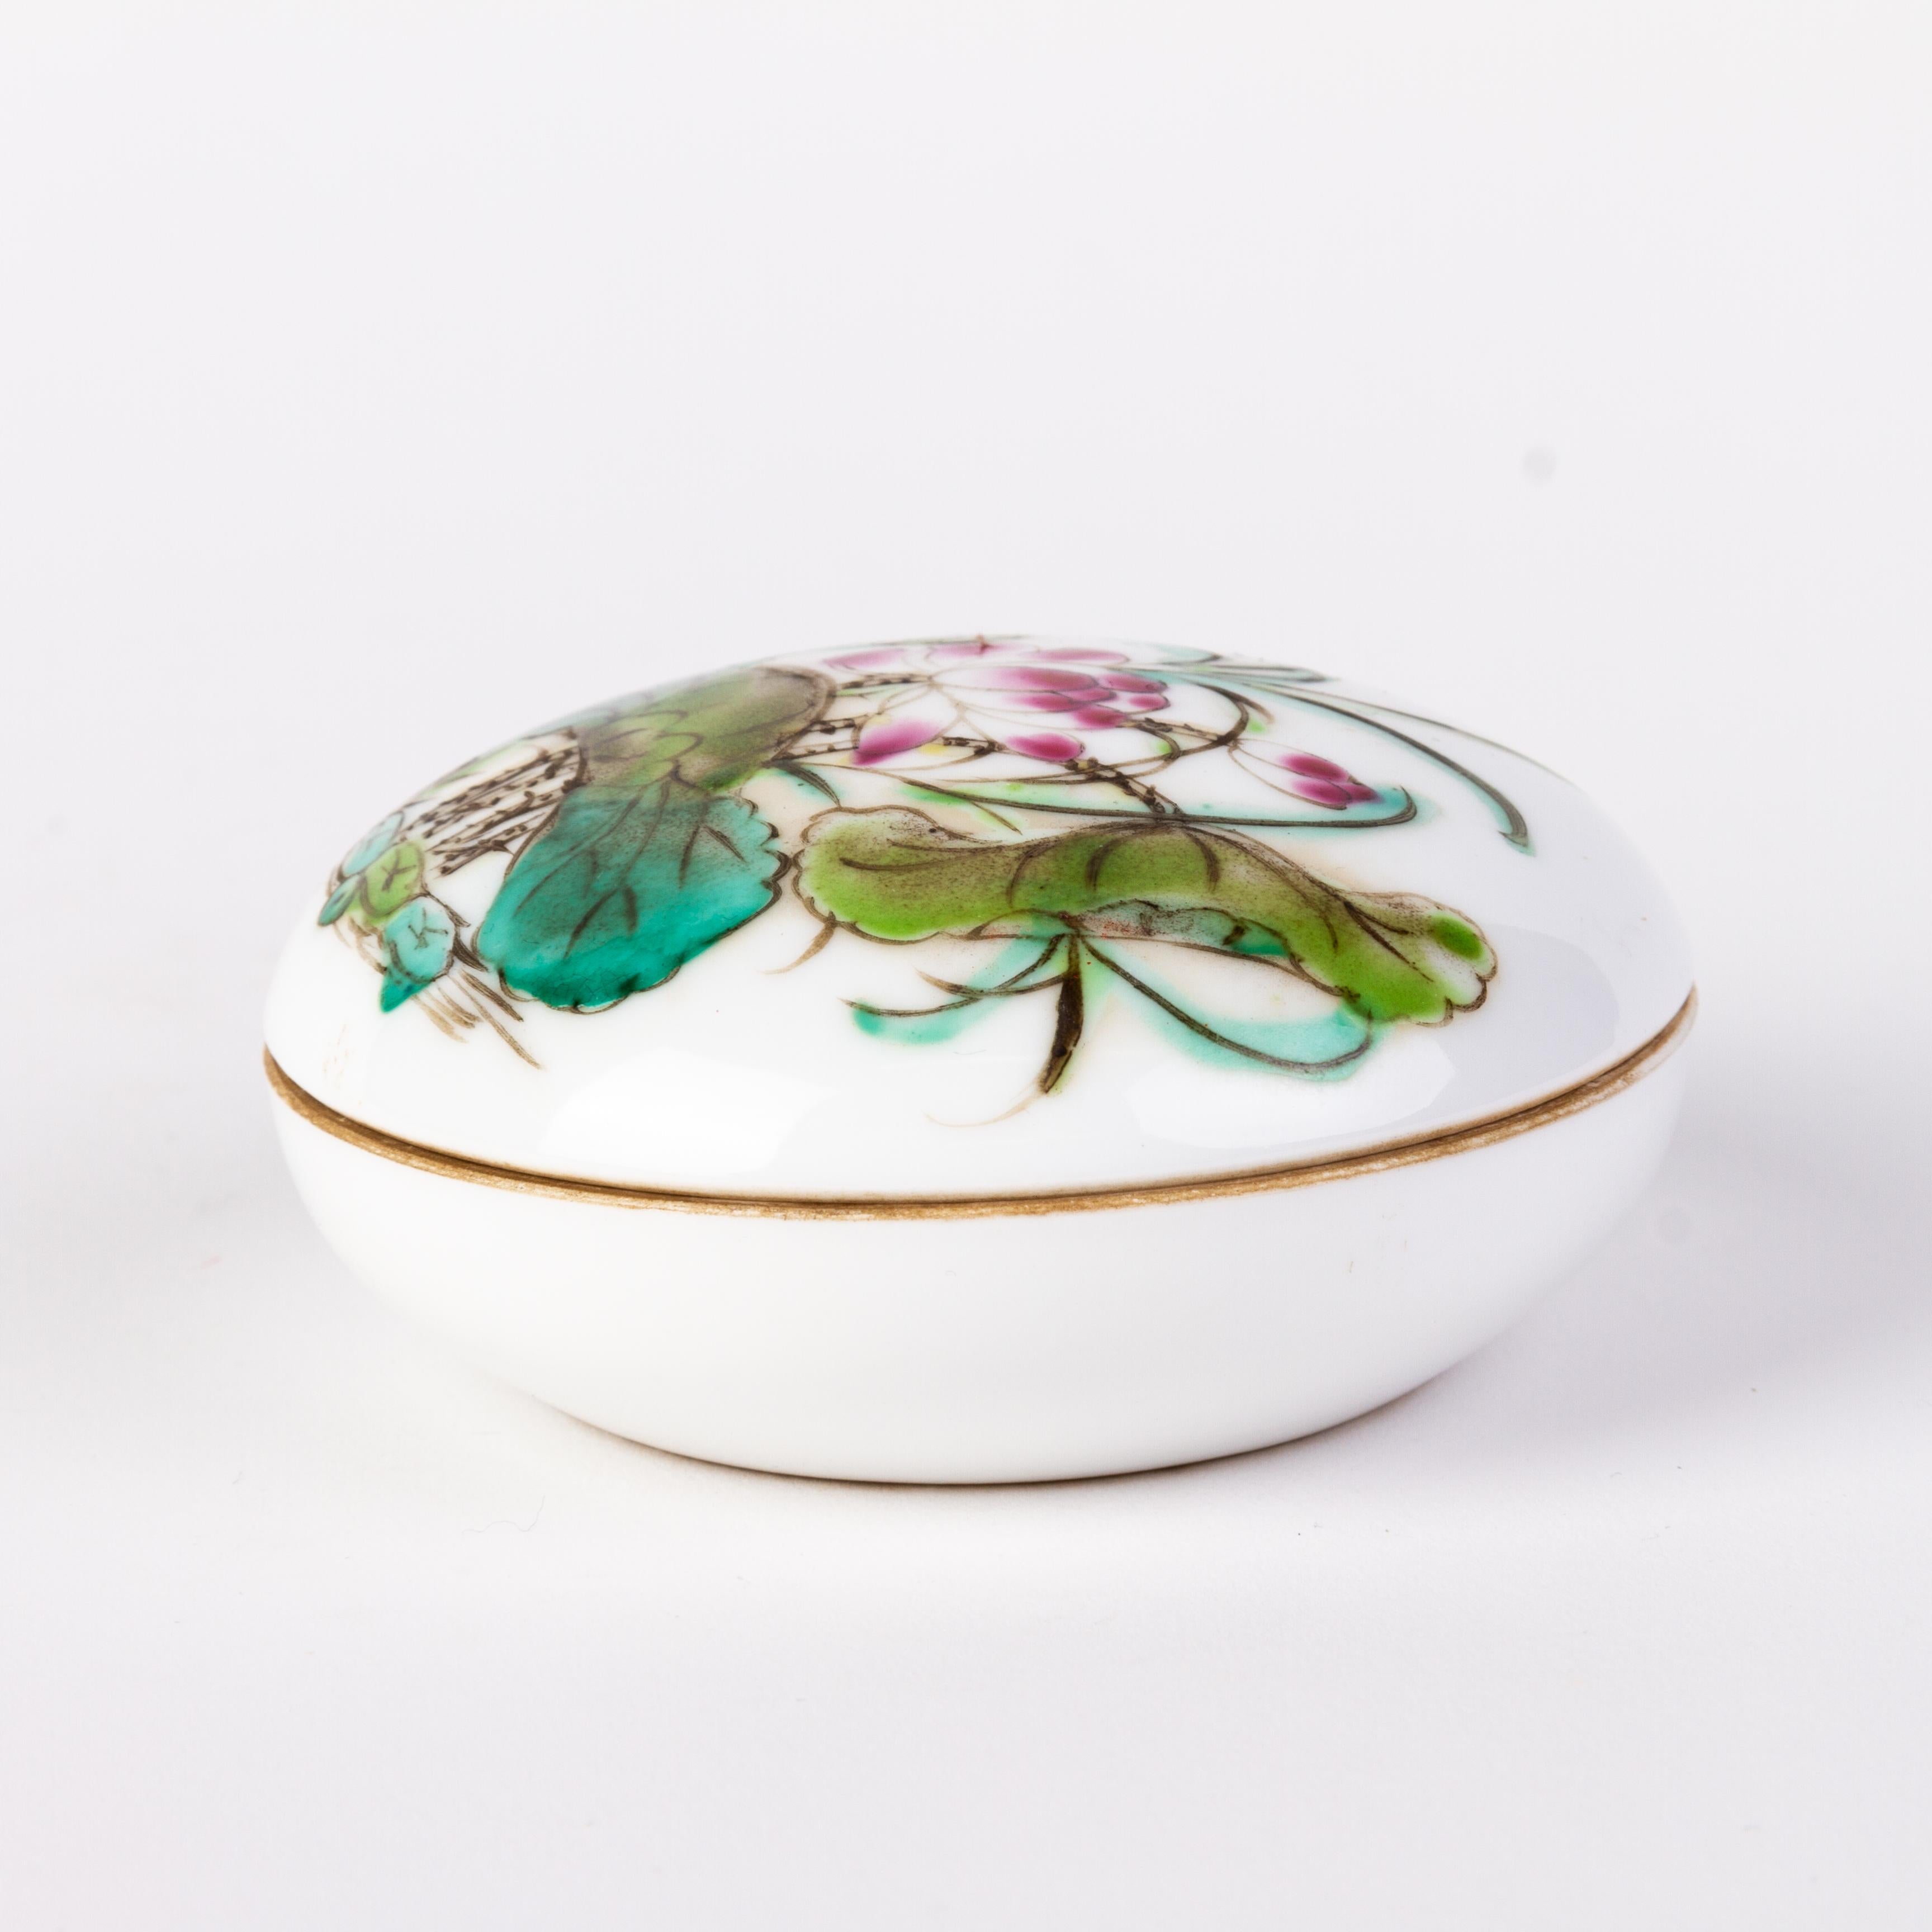 Chinese Republic Period Famille Rose Porcelain Lidded Box with Seal Mark In Good Condition For Sale In Nottingham, GB